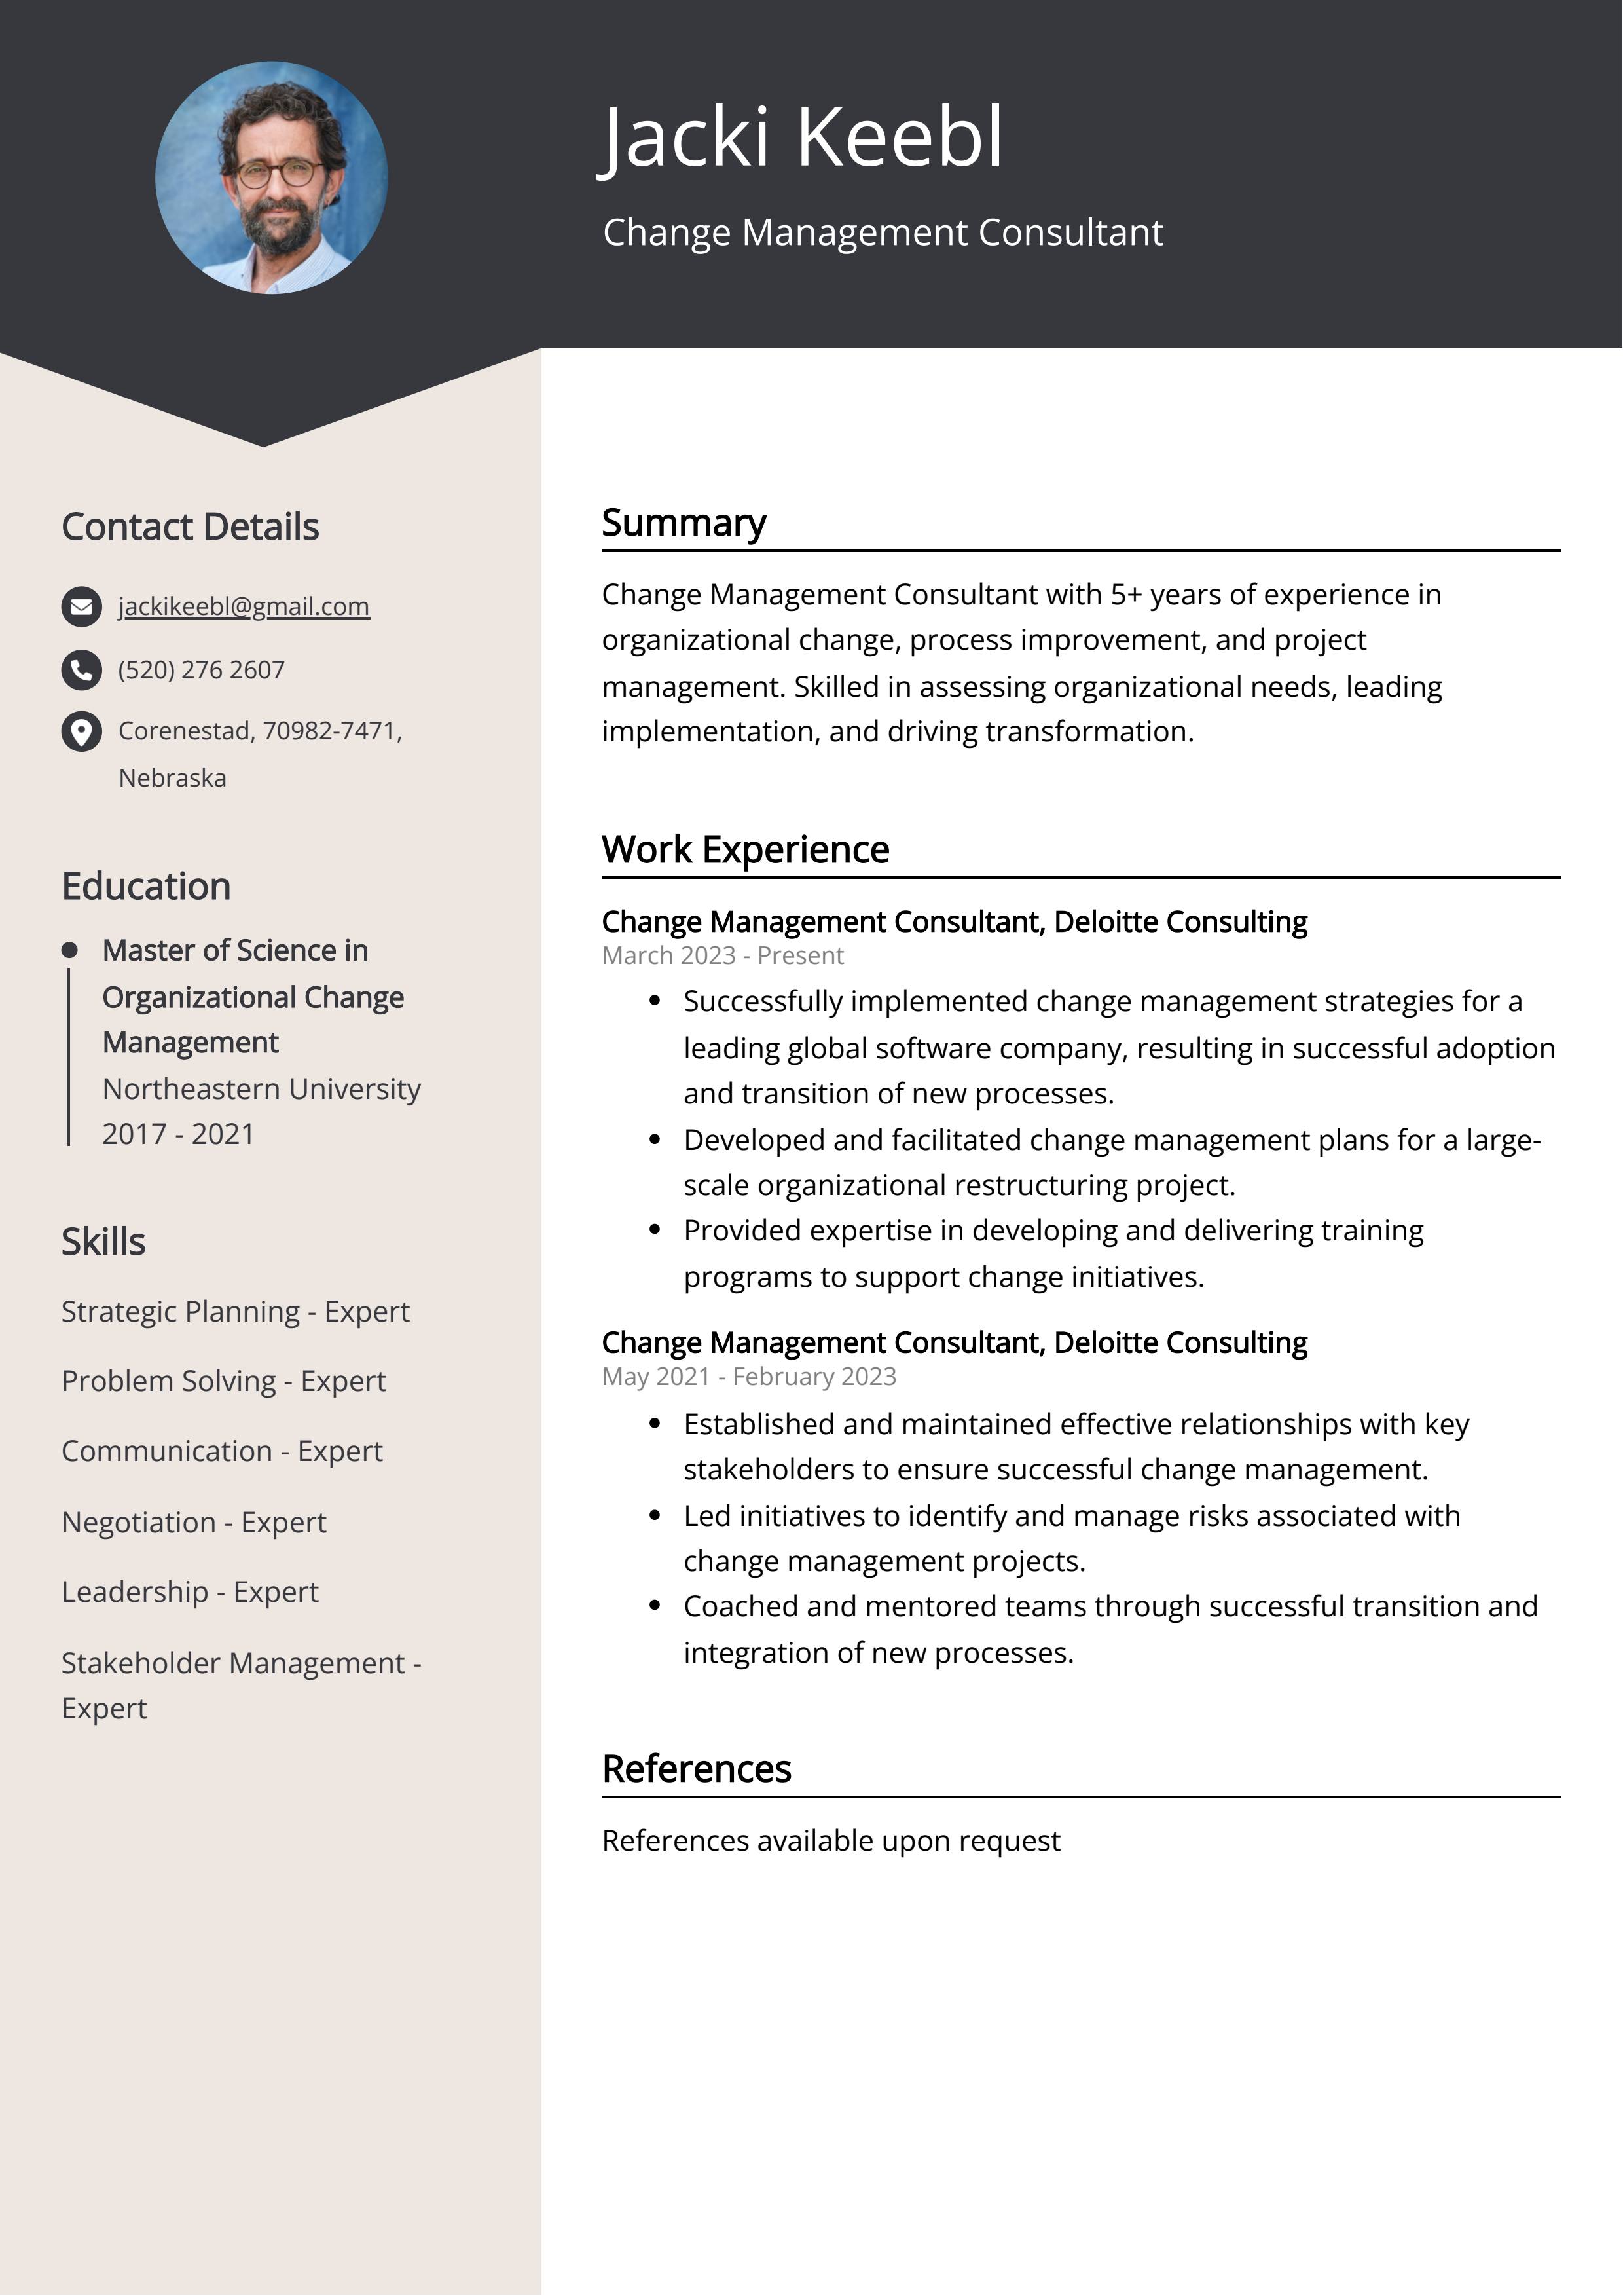 Change Management Consultant Resume Example